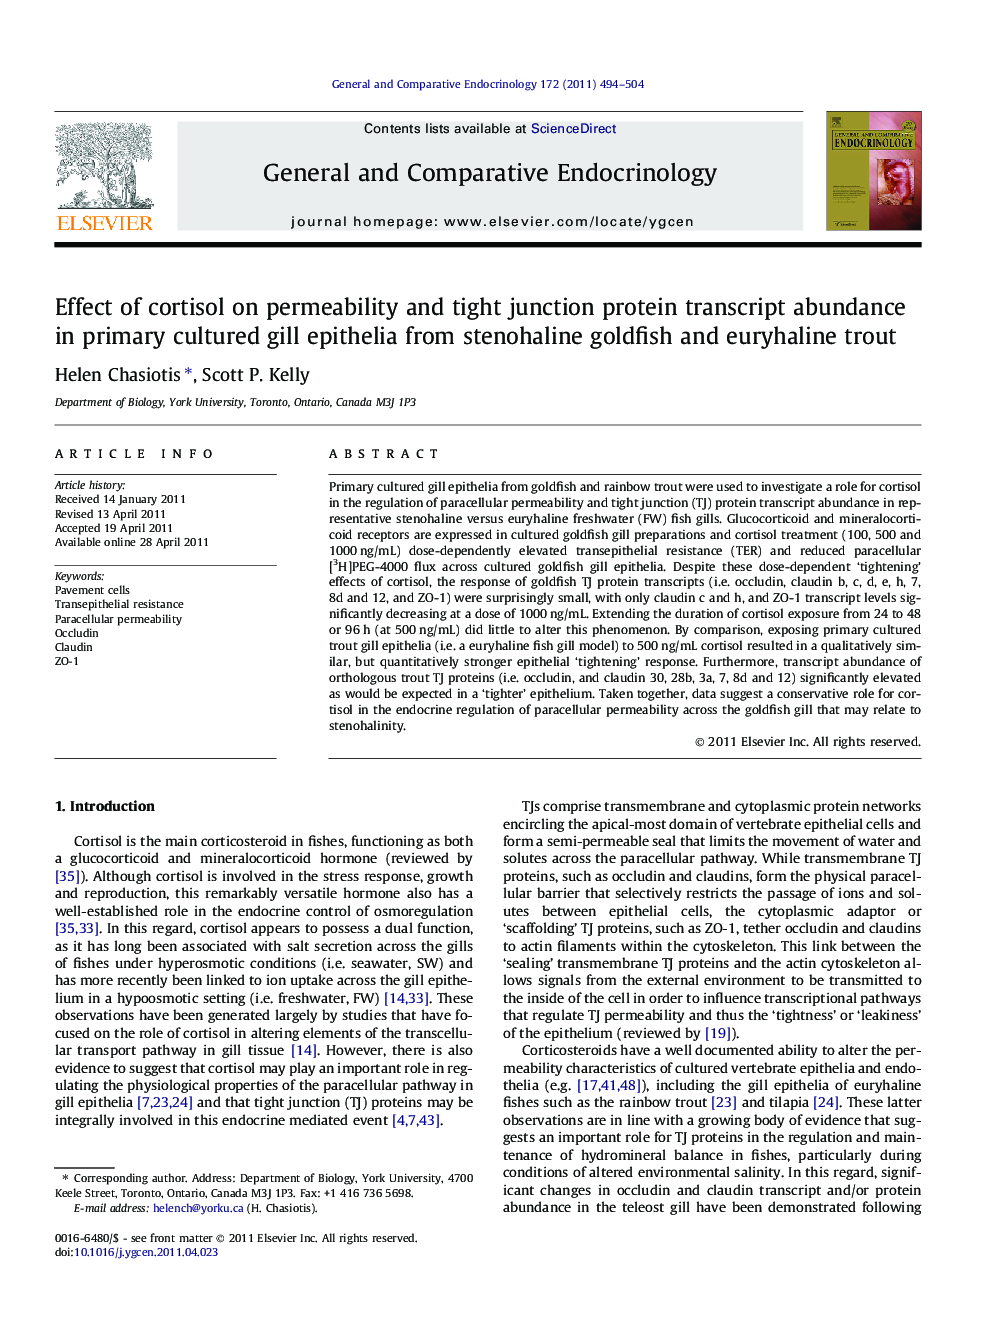 Effect of cortisol on permeability and tight junction protein transcript abundance in primary cultured gill epithelia from stenohaline goldfish and euryhaline trout